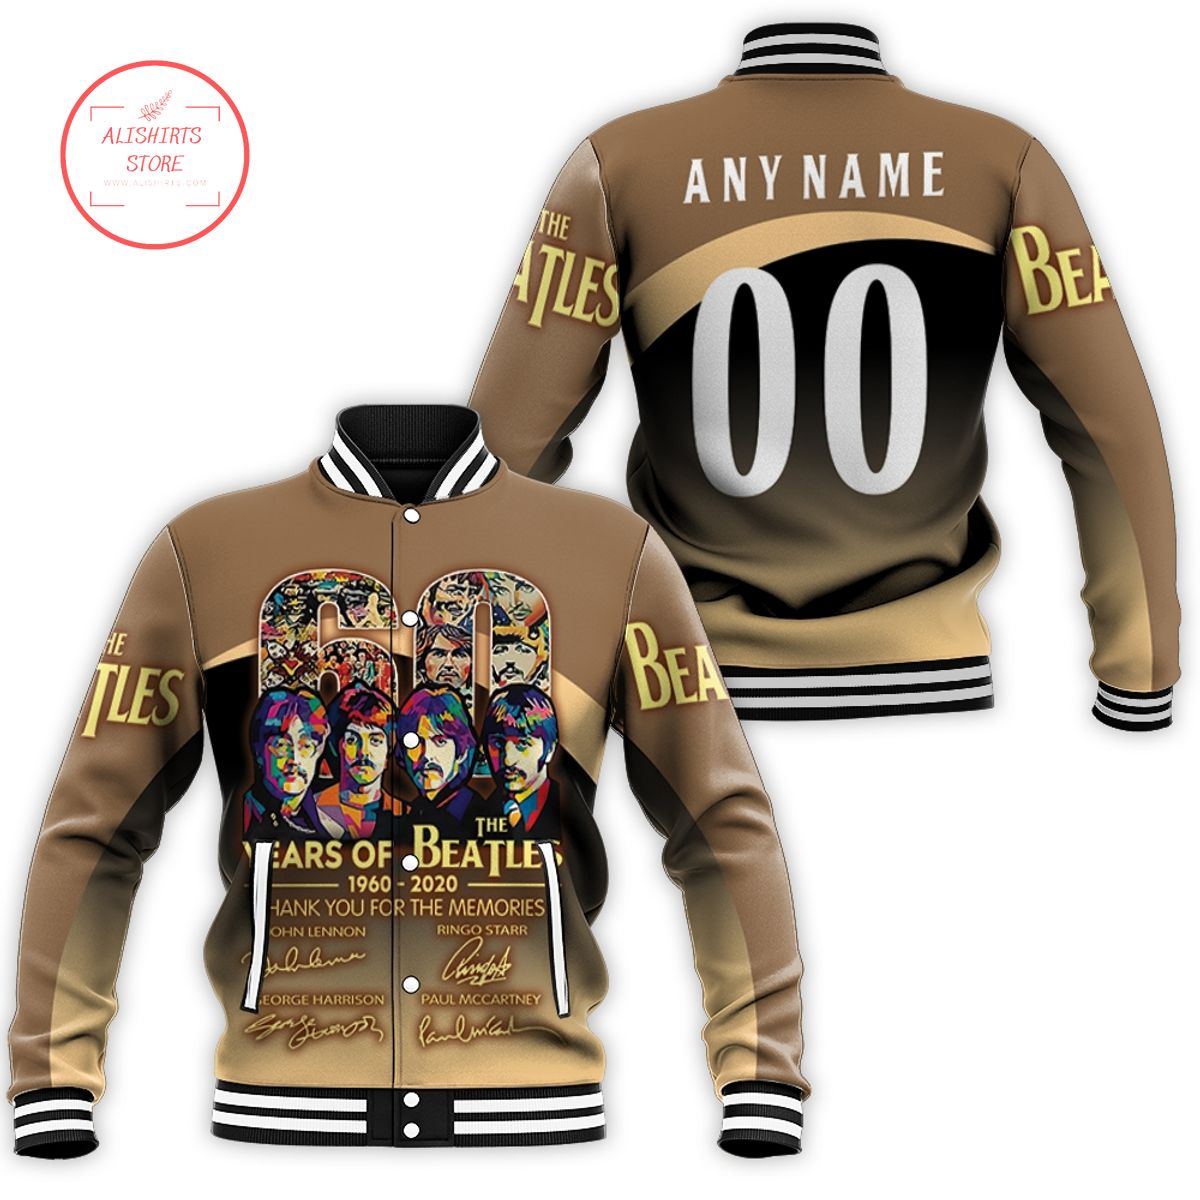 The Beatles 60 Years Of 1960 2020 Thank You Memories Rock Band The Beatles varsity jacket